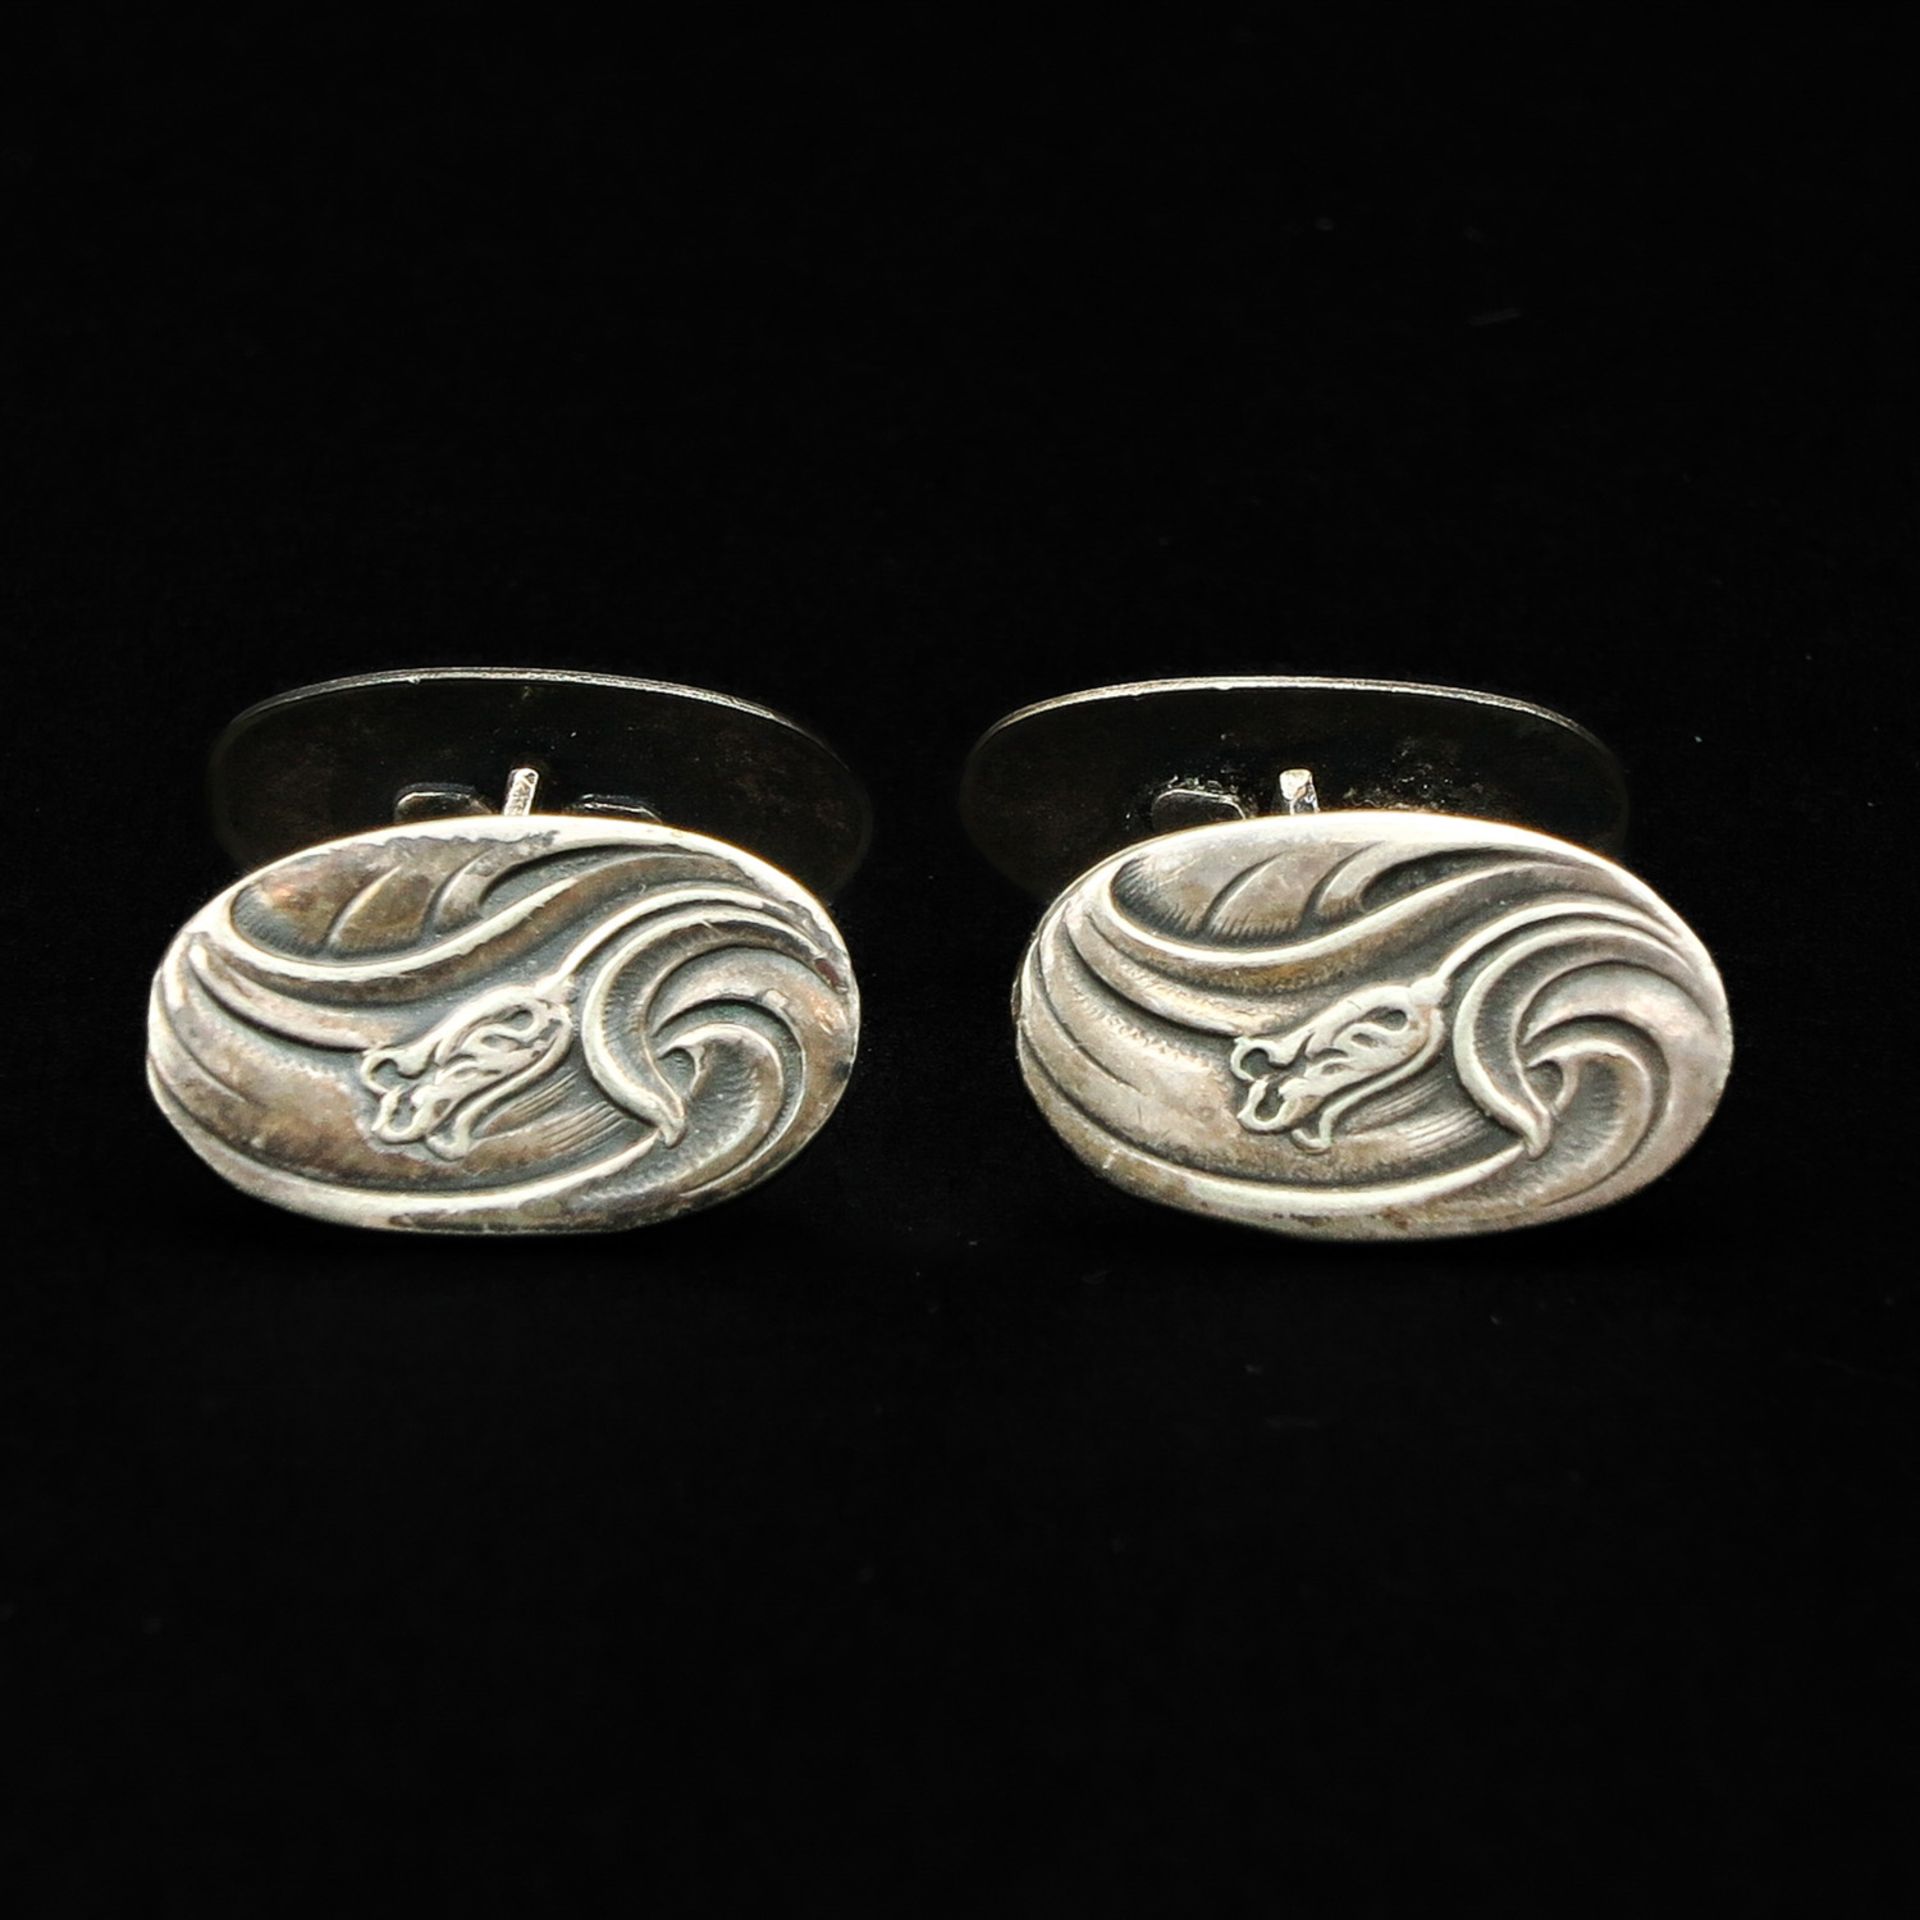 A Collection of Cuff Links - Image 5 of 9